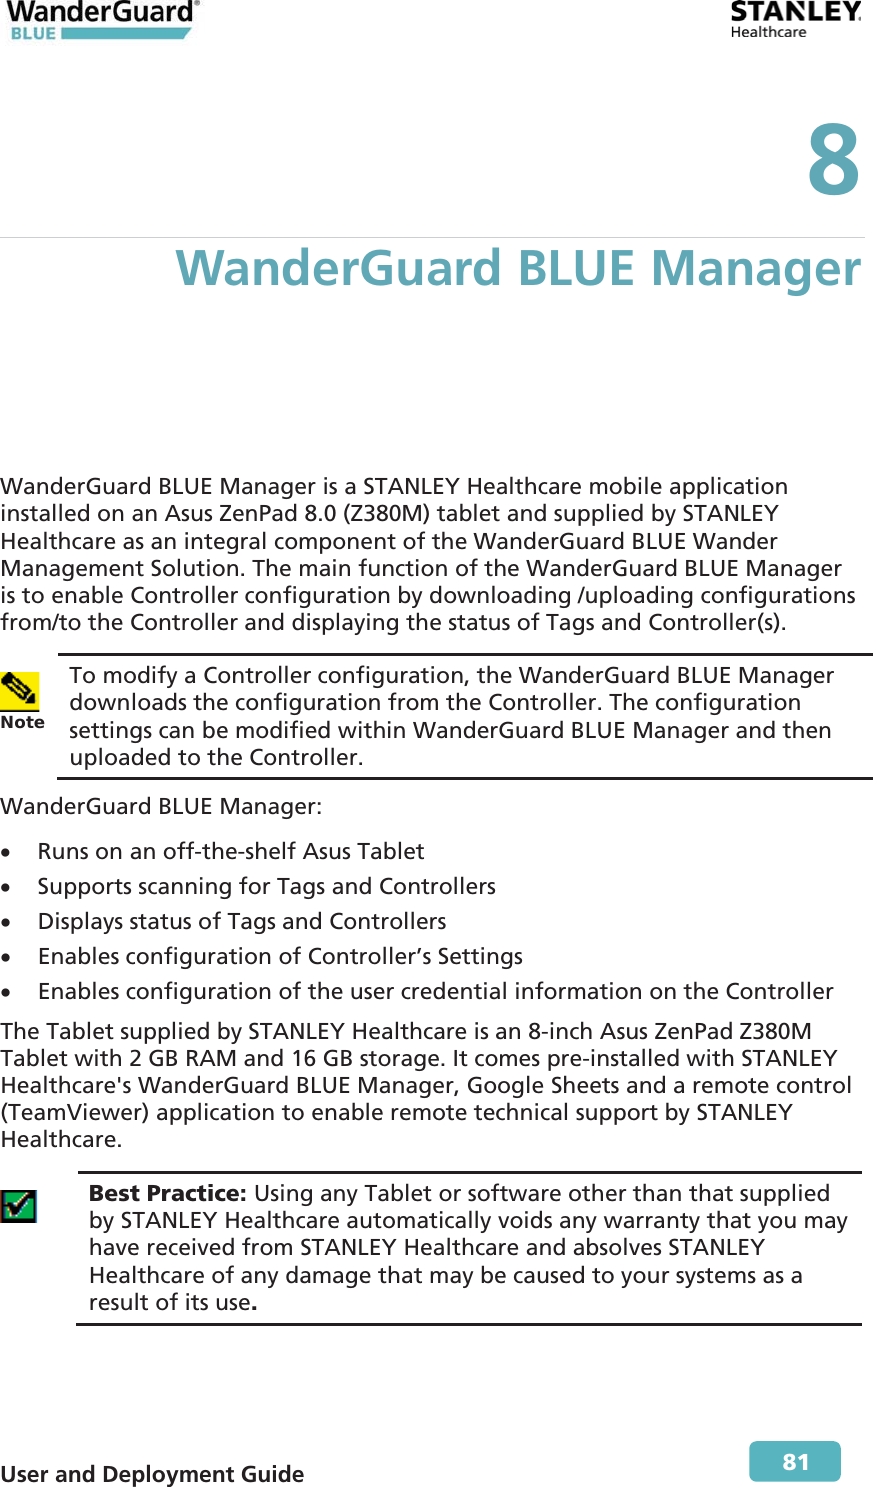  User and Deployment Guide        81 8 WanderGuard BLUE Manager WanderGuard BLUE Manager is a STANLEY Healthcare mobile application installed on an Asus ZenPad 8.0 (Z380M) tablet and supplied by STANLEY Healthcare as an integral component of the WanderGuard BLUE Wander Management Solution. The main function of the WanderGuard BLUE Manager is to enable Controller configuration by downloading /uploading configurations from/to the Controller and displaying the status of Tags and Controller(s).  Note To modify a Controller configuration, the WanderGuard BLUE Manager downloads the configuration from the Controller. The configuration settings can be modified within WanderGuard BLUE Manager and then uploaded to the Controller.  WanderGuard BLUE Manager: x Runs on an off-the-shelf Asus Tablet x Supports scanning for Tags and Controllers x Displays status of Tags and Controllers x Enables configuration of Controller’s Settings x Enables configuration of the user credential information on the Controller The Tablet supplied by STANLEY Healthcare is an 8-inch Asus ZenPad Z380M Tablet with 2 GB RAM and 16 GB storage. It comes pre-installed with STANLEY Healthcare&apos;s WanderGuard BLUE Manager, Google Sheets and a remote control (TeamViewer) application to enable remote technical support by STANLEY Healthcare.  Best Practice: Using any Tablet or software other than that supplied by STANLEY Healthcare automatically voids any warranty that you may have received from STANLEY Healthcare and absolves STANLEY Healthcare of any damage that may be caused to your systems as a result of its use. 